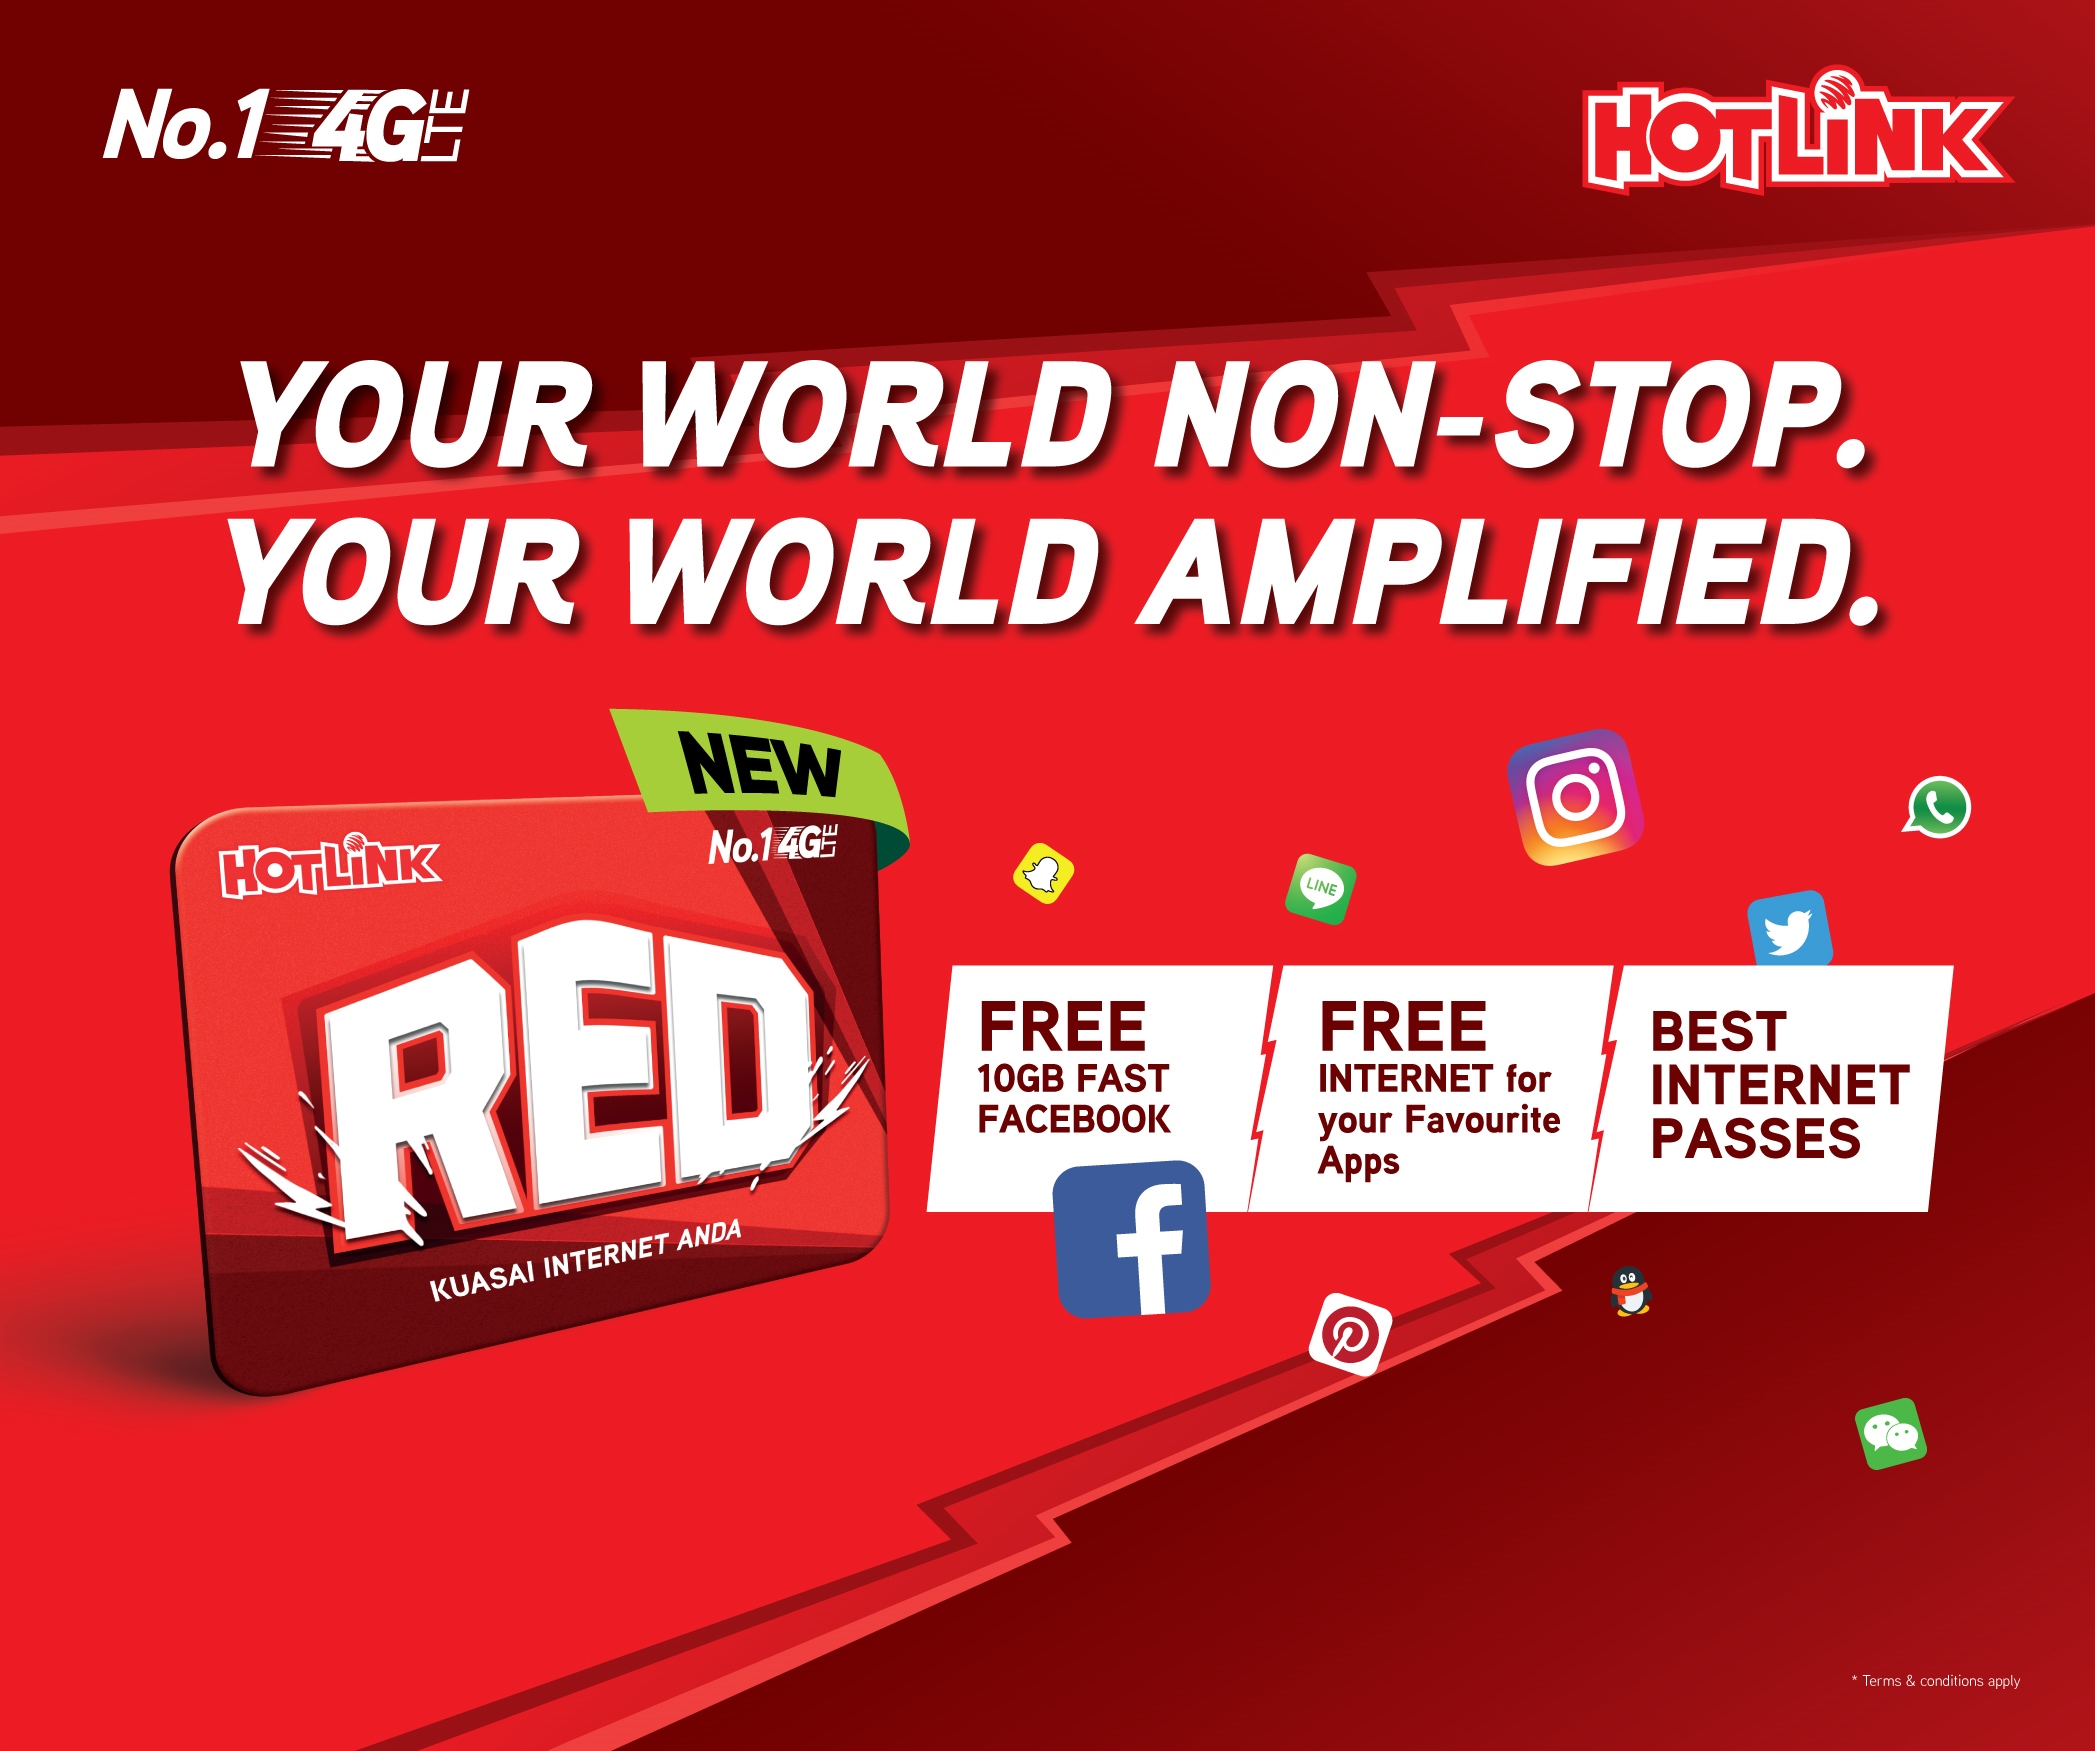 New prepaid pack Hotlink RED offering tons of free Internet Data for social apps starting from RM3